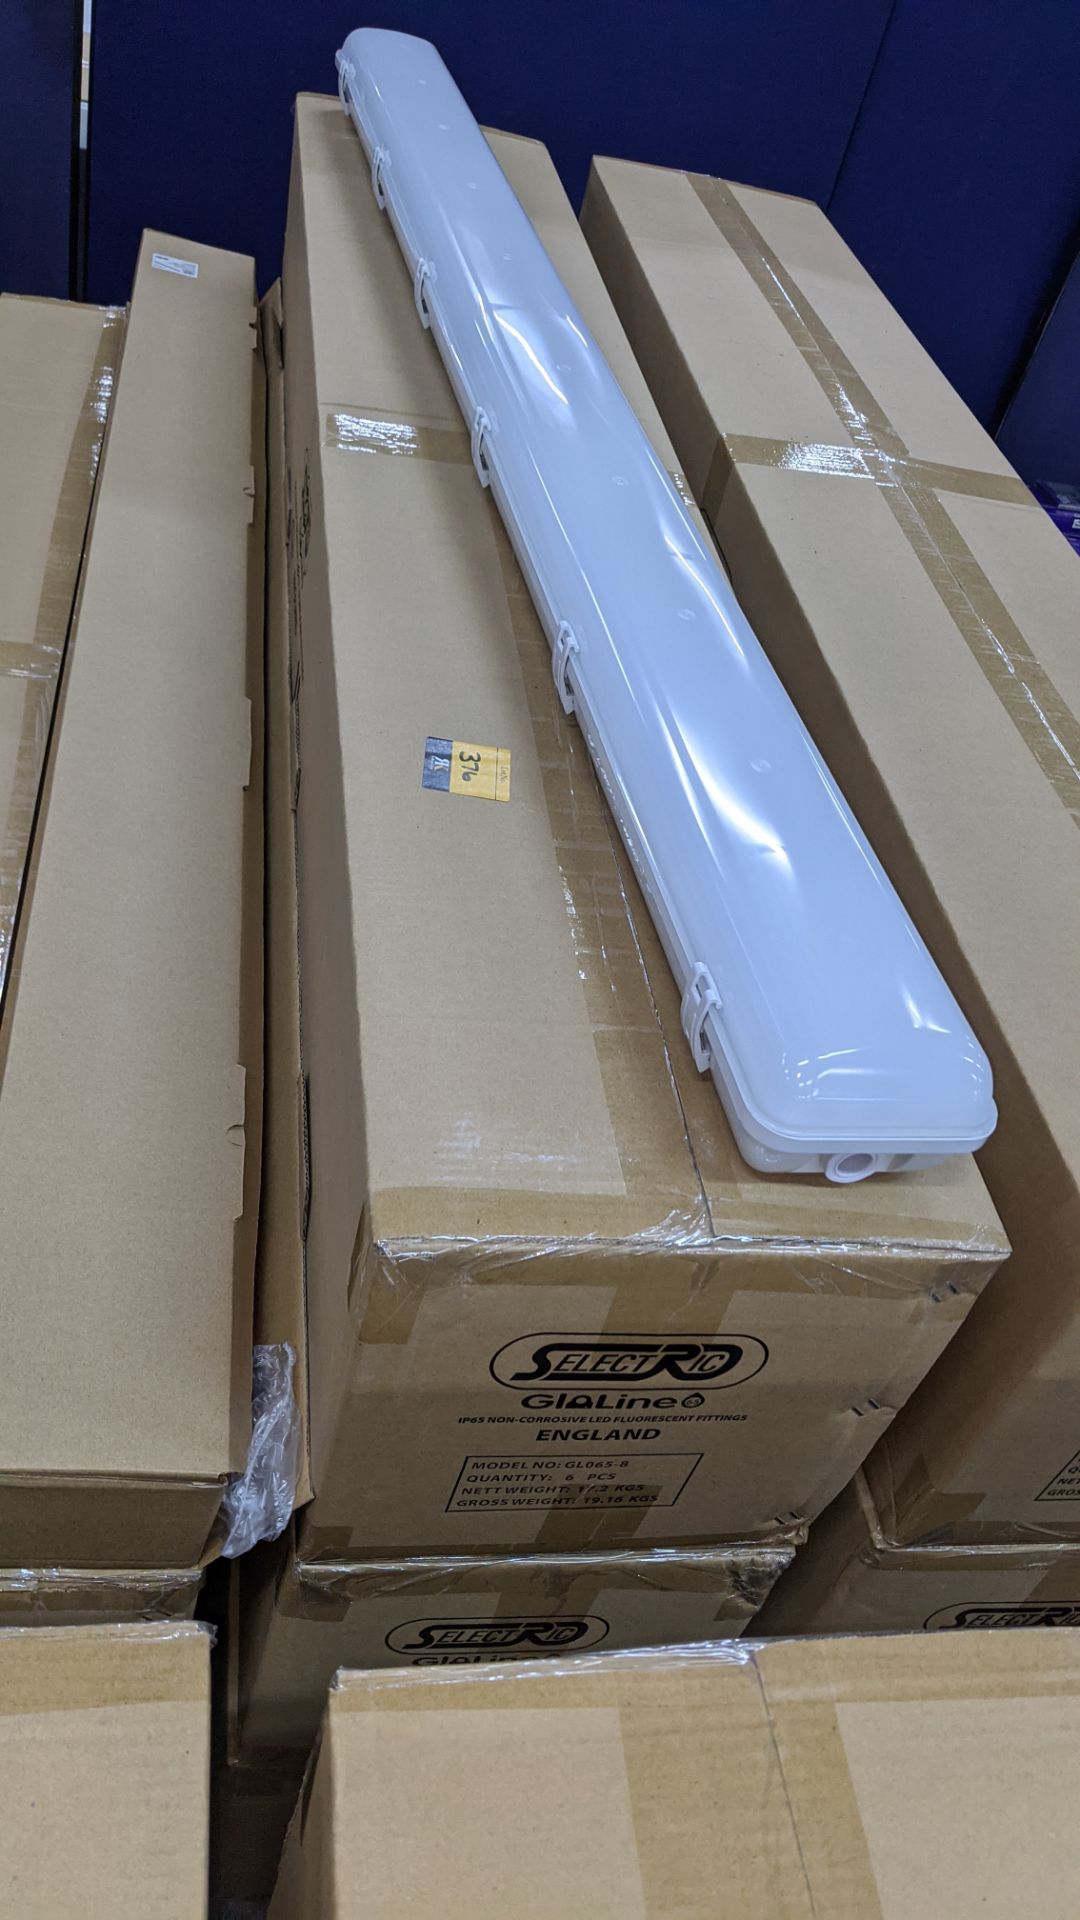 18 off IP65 non-corrosive LED fluorescent light fittings. Model GLO65-8, 5', twin LED 60W (with eme